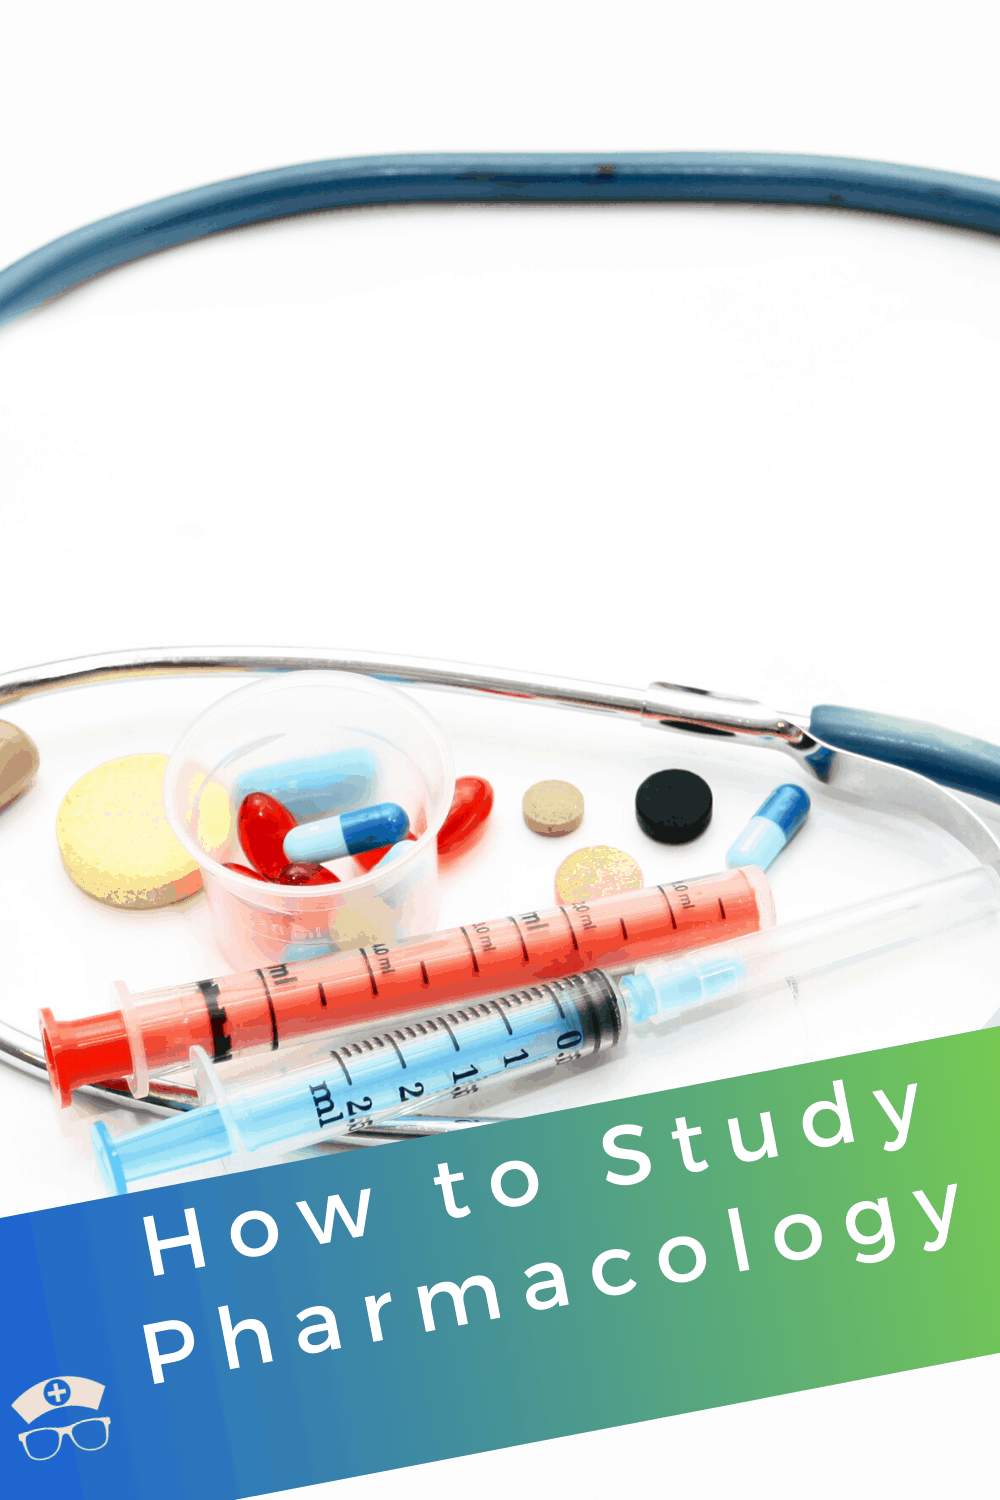 How to Study Pharmacology. A subject as critical as pharmacology is not easy to study for. These tips on how to study pharmacology can help you ace this portion in no time. #thenerdynurse #nurse #nurses #nursingschool #mnemoncis #pharmacology #studytips